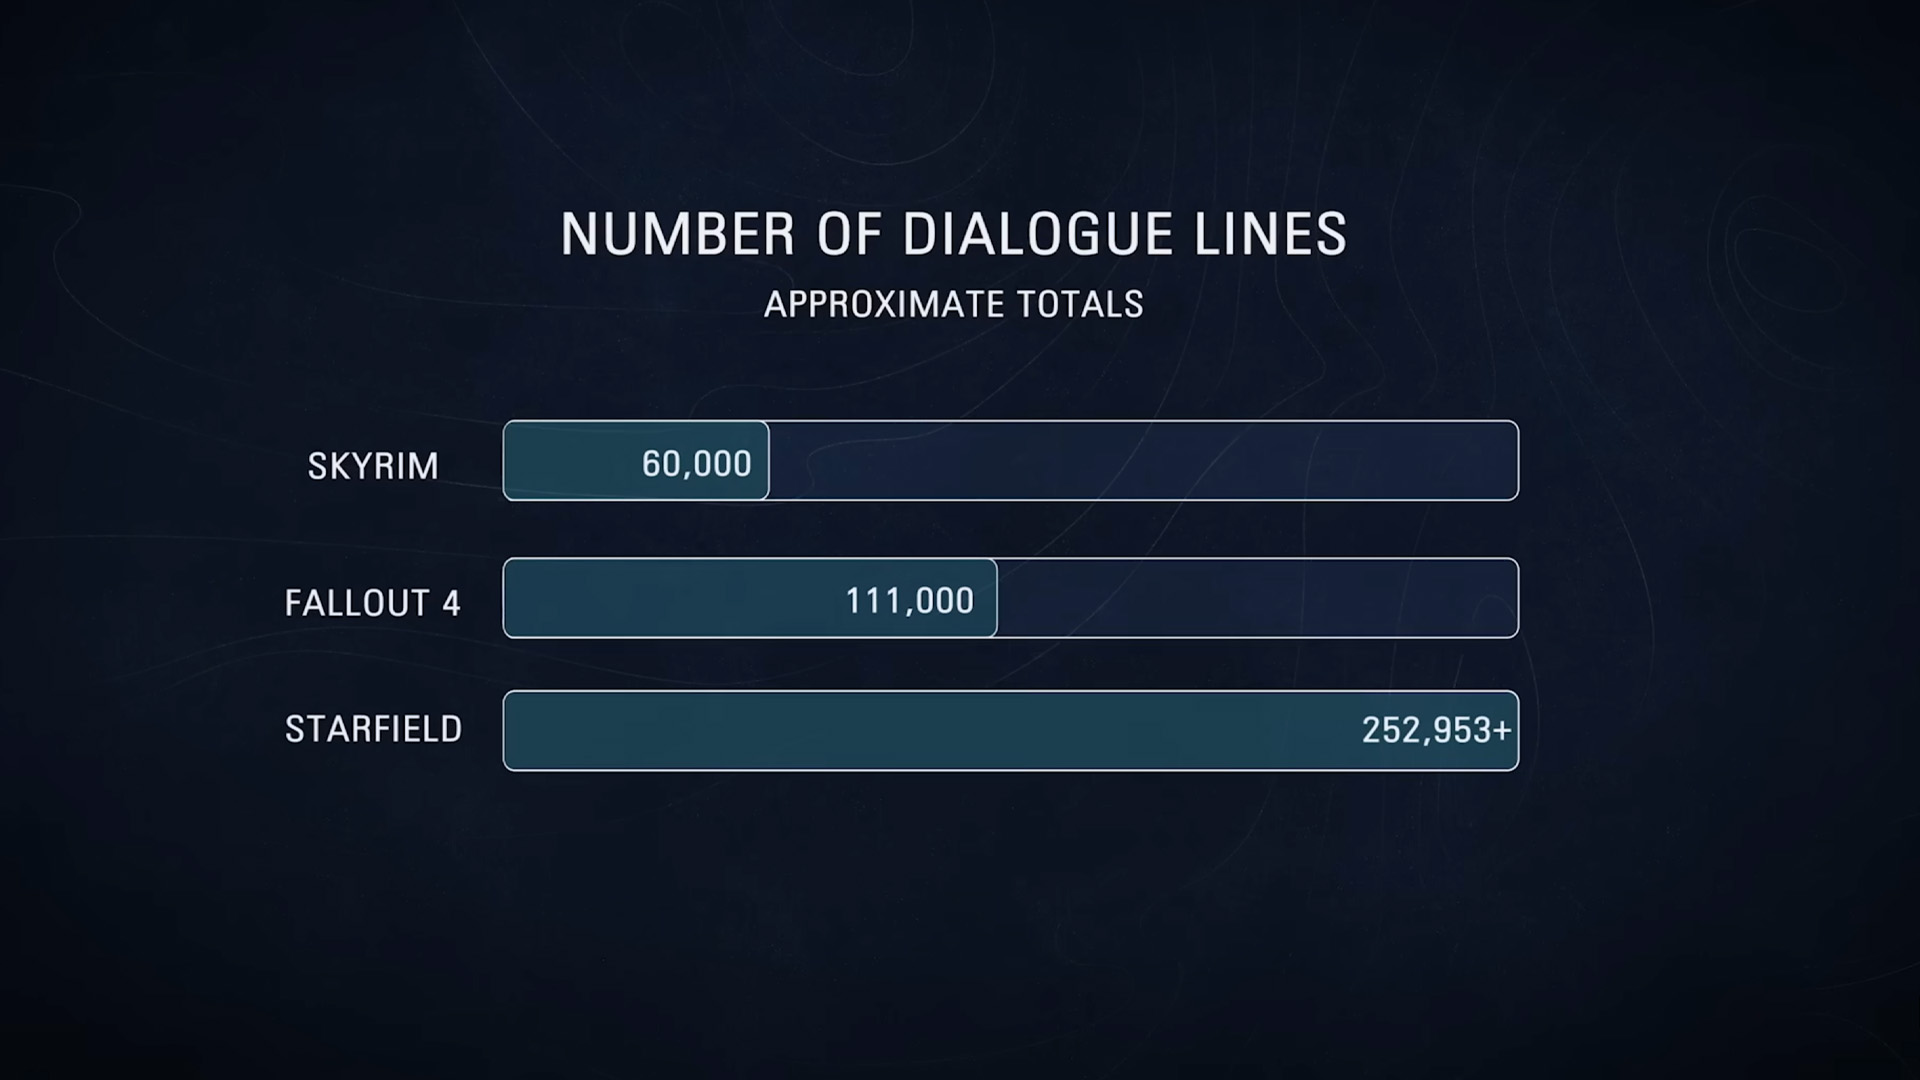 Starfield dialogue line count, has over 250,000 lines of dialogue